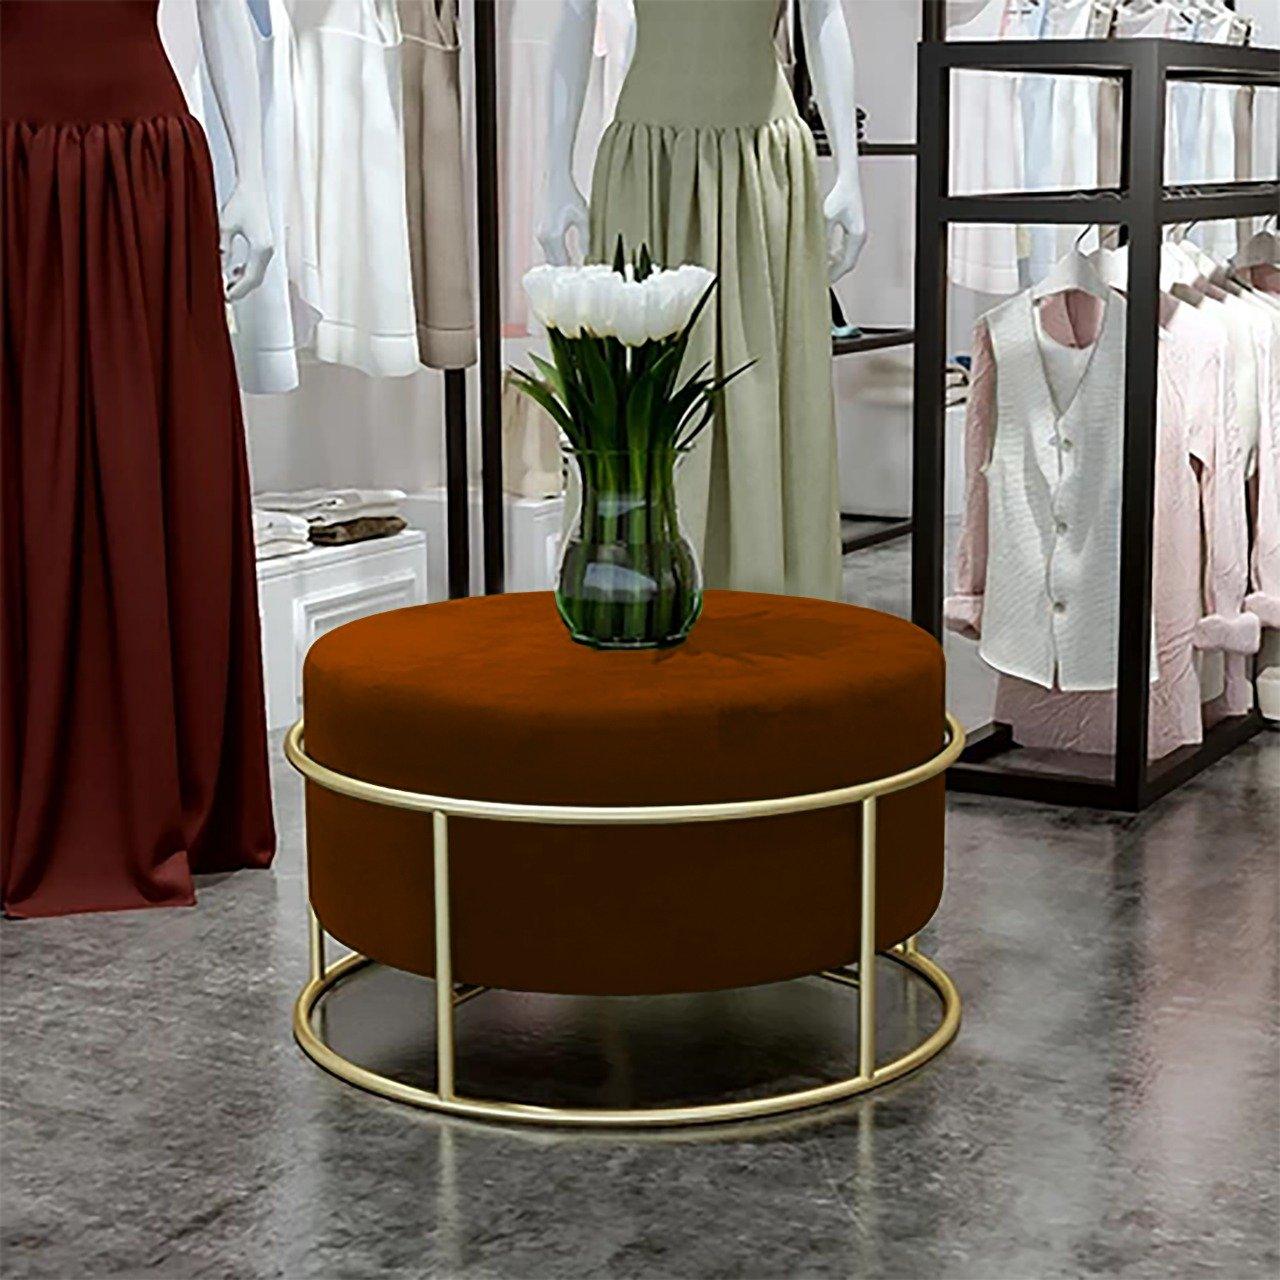 Luxury Wooden Round stool With Steel Stand -301 - 92Bedding